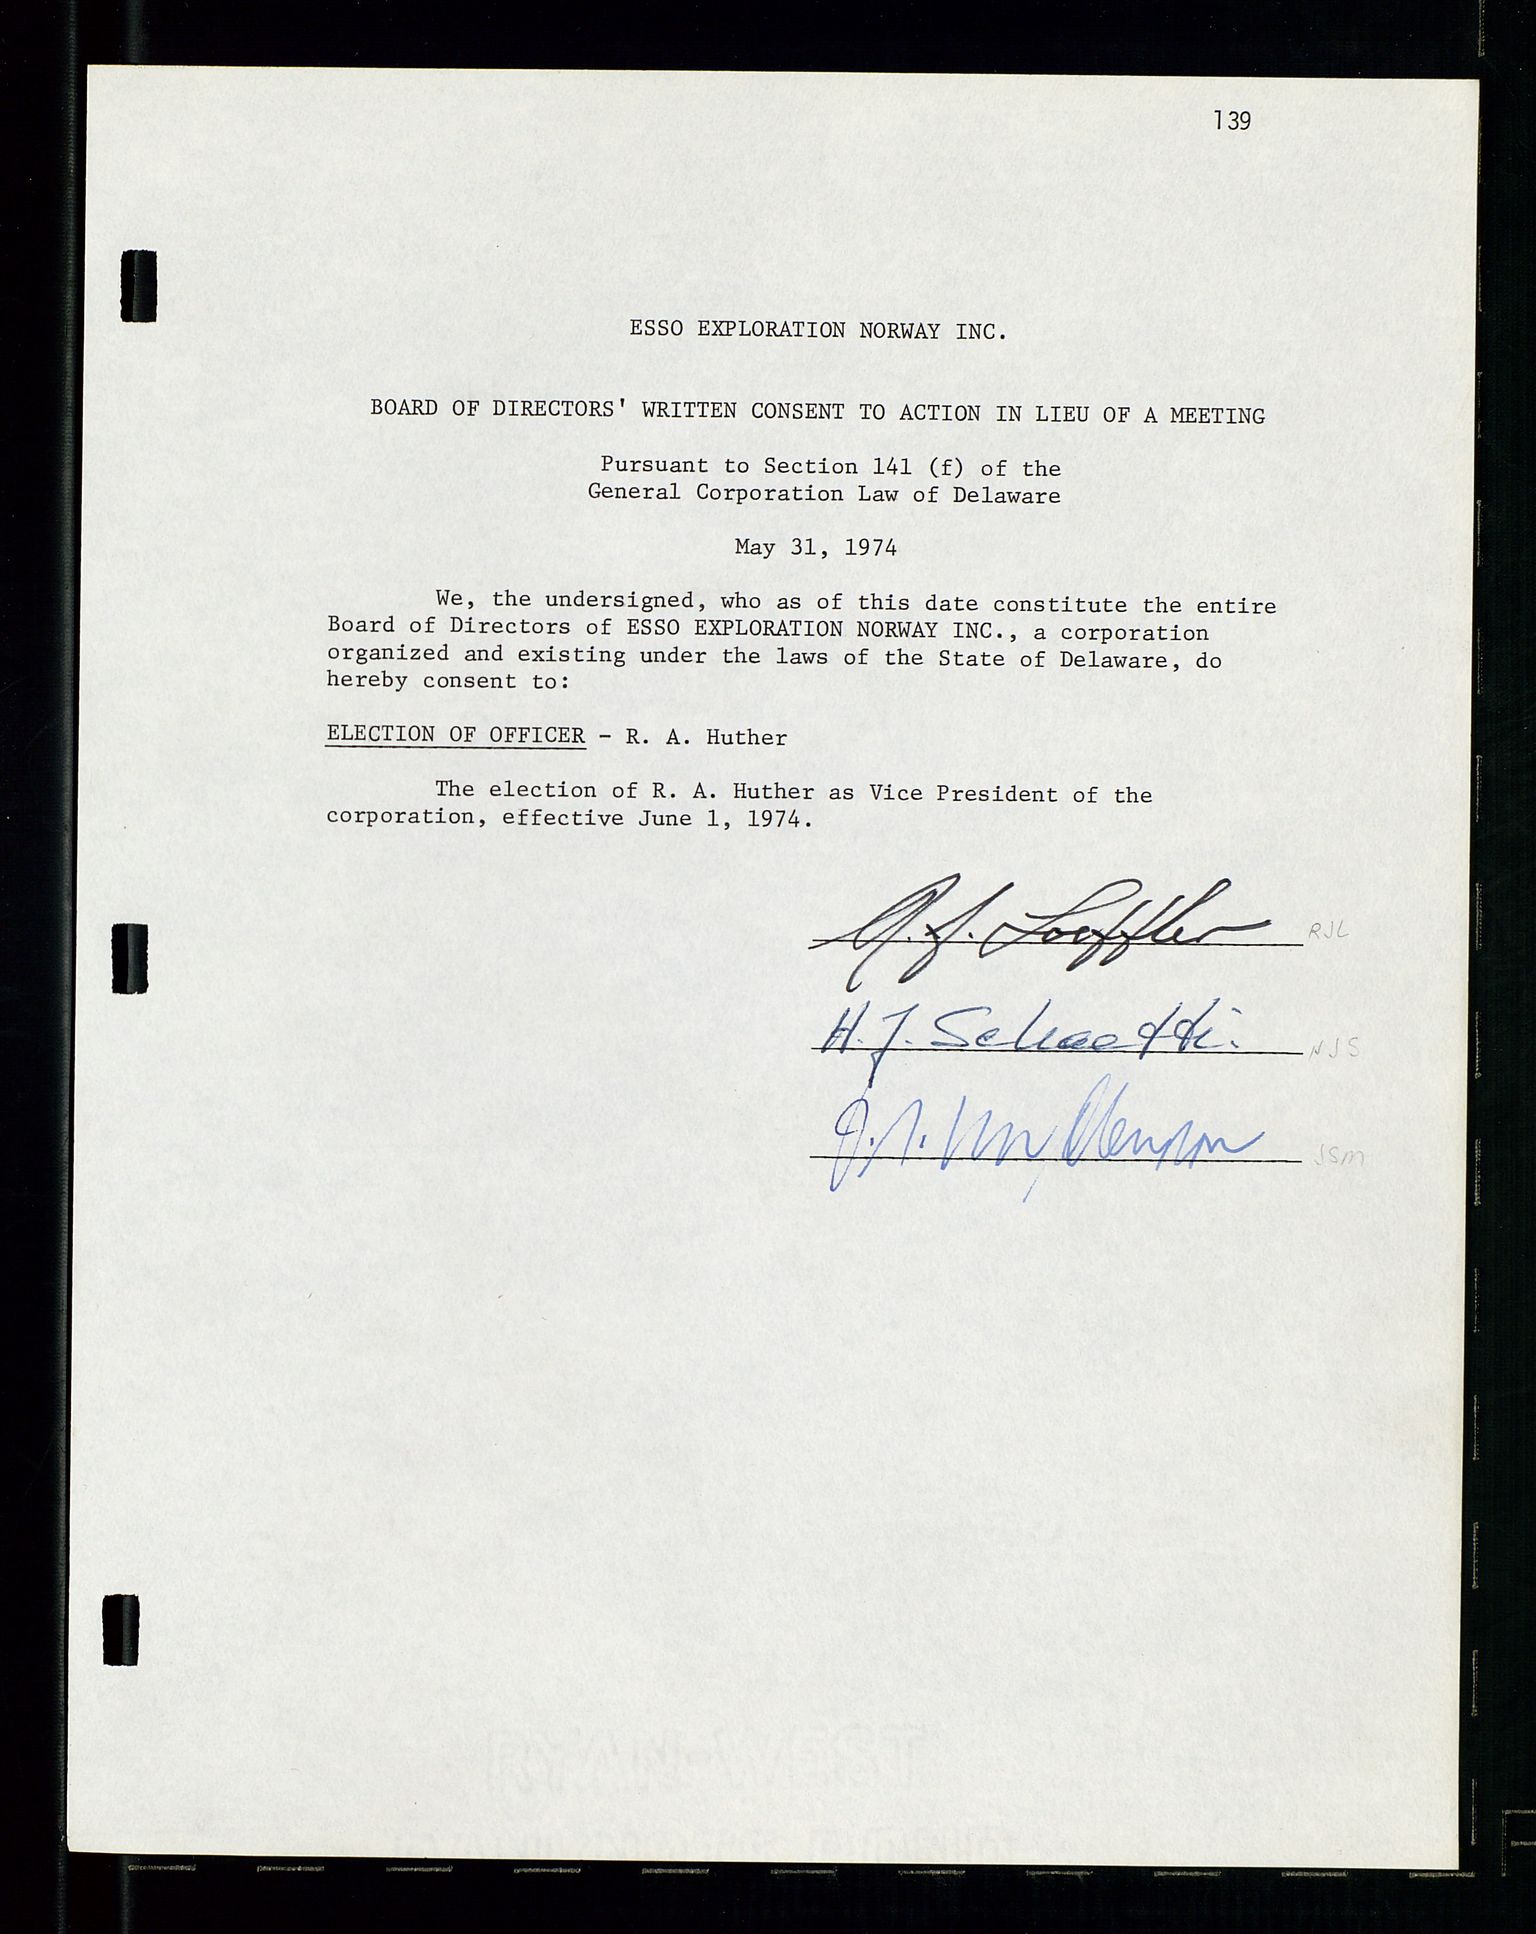 Pa 1512 - Esso Exploration and Production Norway Inc., SAST/A-101917/A/Aa/L0001/0001: Styredokumenter / Corporate records, By-Laws, Board meeting minutes, Incorporations, 1965-1975, p. 139